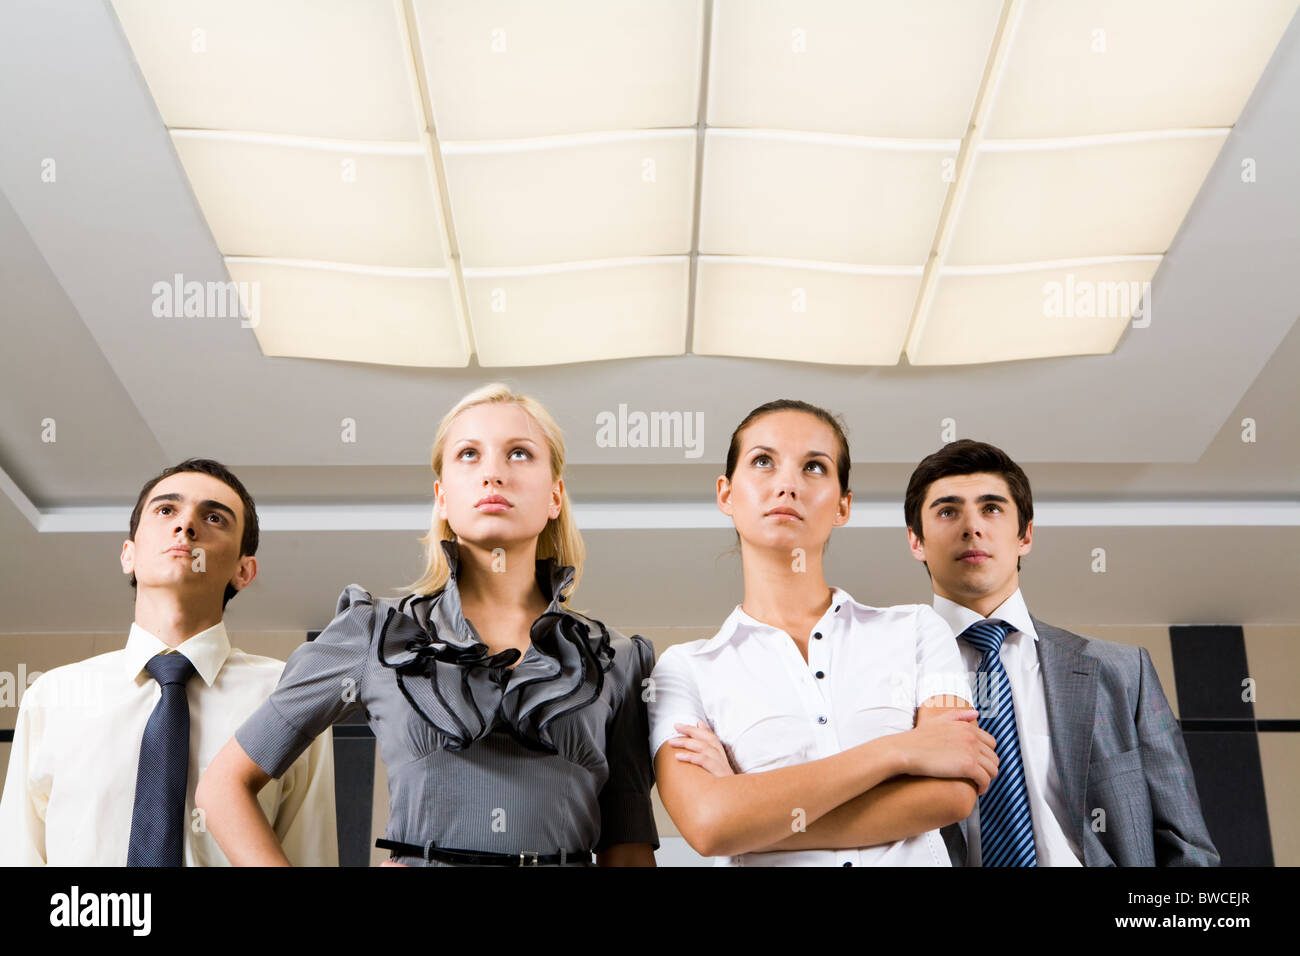 Several confident employees standing in row and looking upwards seriously Stock Photo